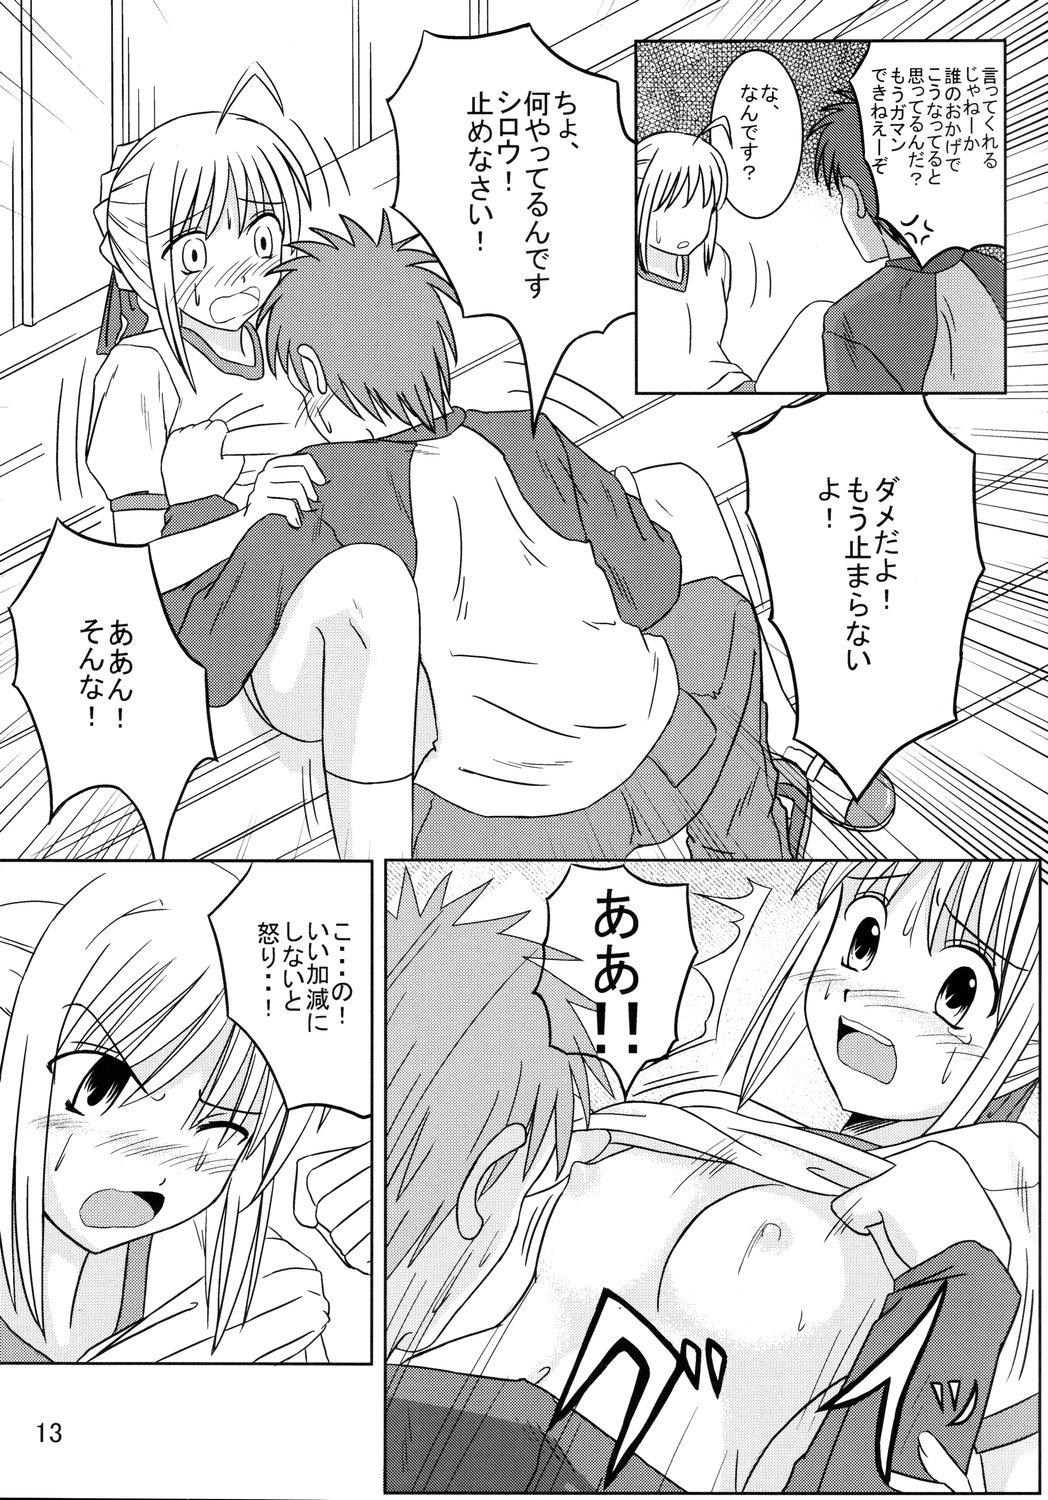 Bisex Saber Of Sanity - Fate stay night Handsome - Page 12